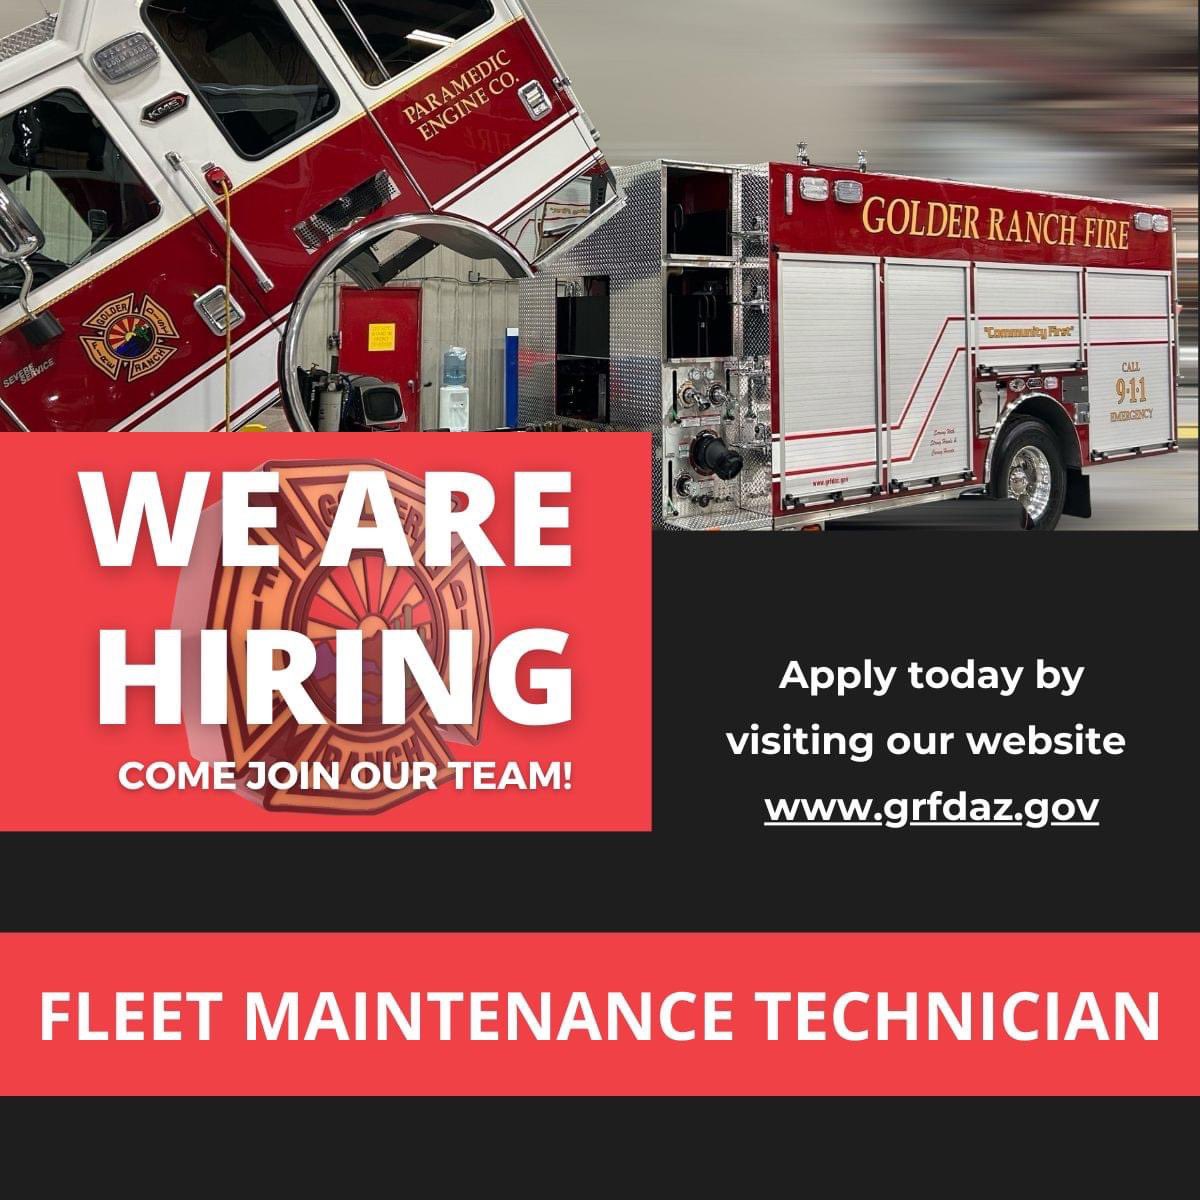 NOW HIRING: Keep emergency vehicles running smoothly and efficiently! 

Golder Ranch Fire District is seeking a Fleet Maintenance Technician to join our incredible team in ensuring the reliability and safety of our emergency response fleet.

Apply through this link: